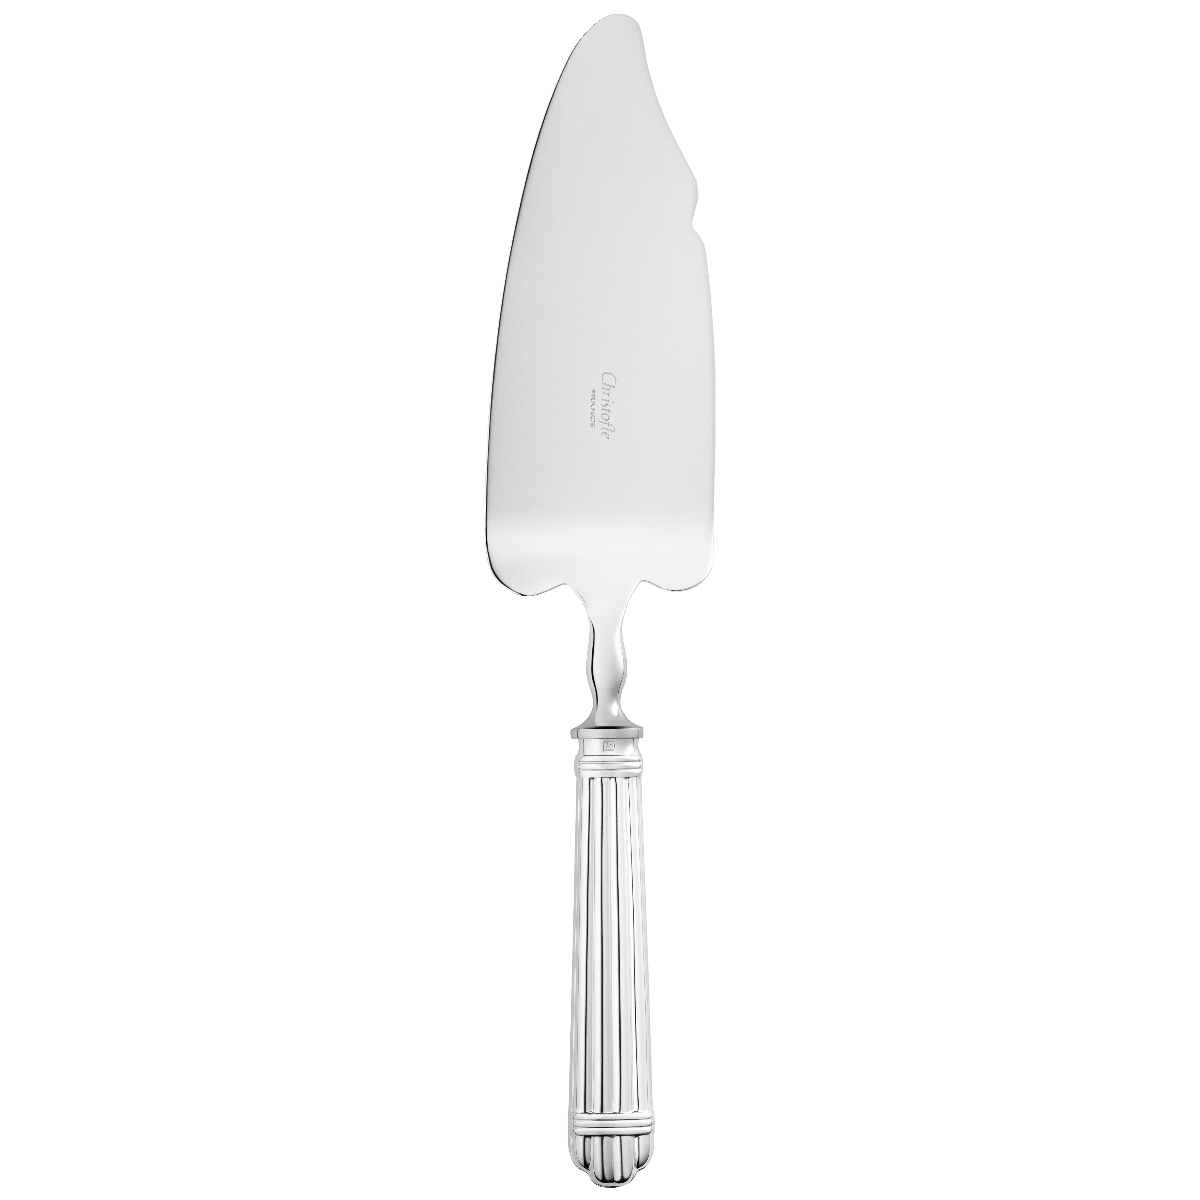 Silver-Plated cake server